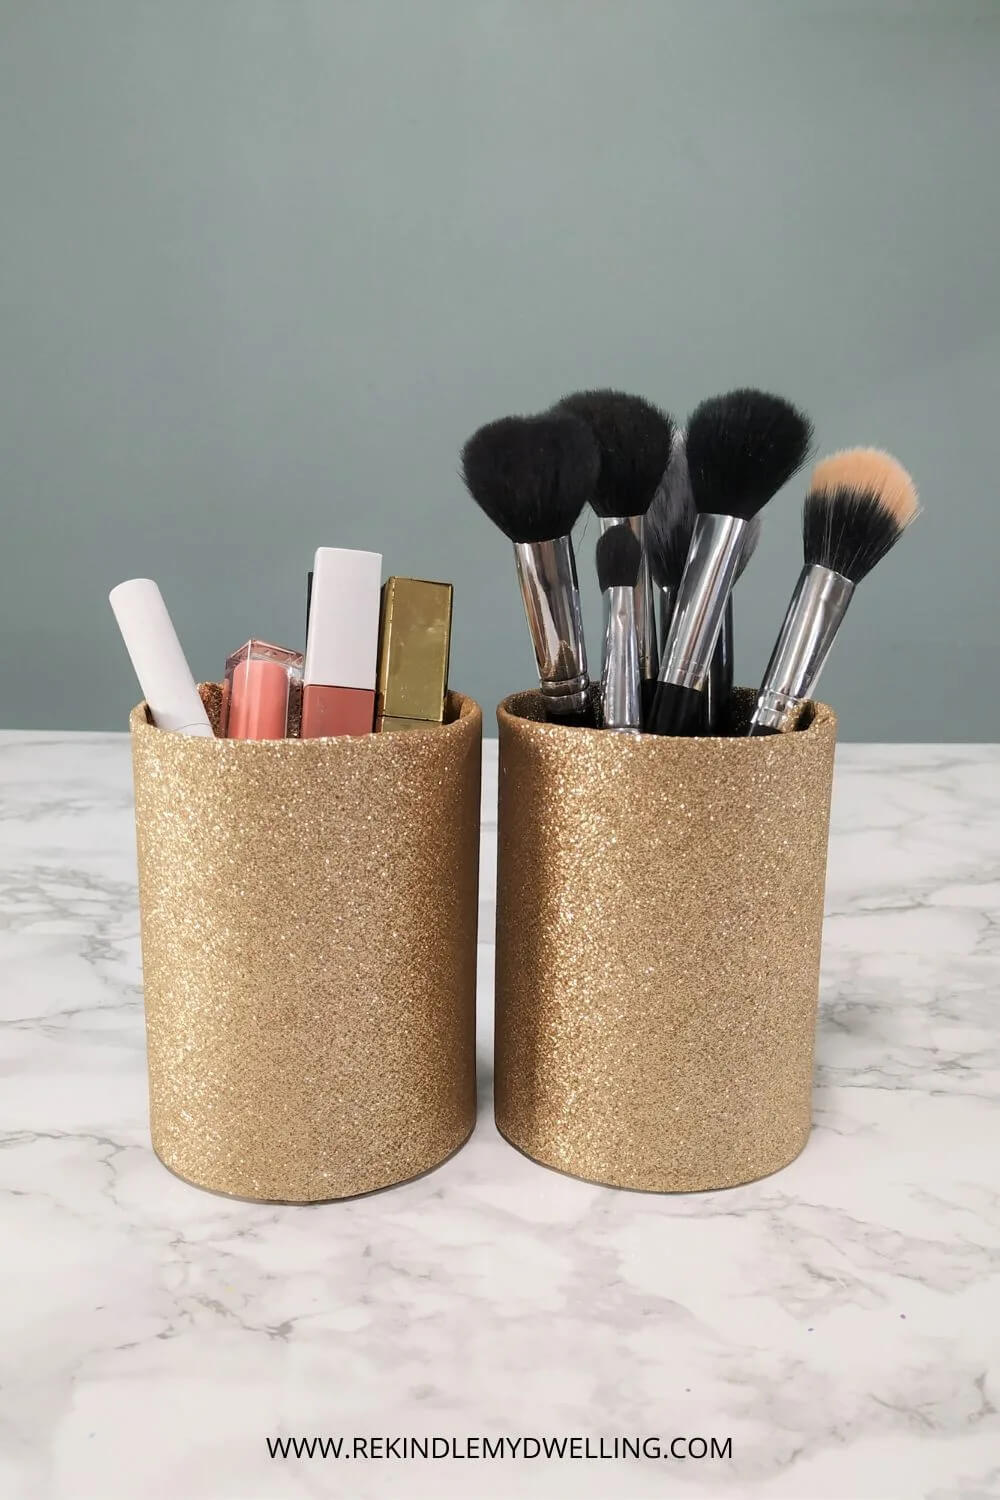 In Frugal Crafts: Don't Throw Out Those Cans, these became makeup organizers